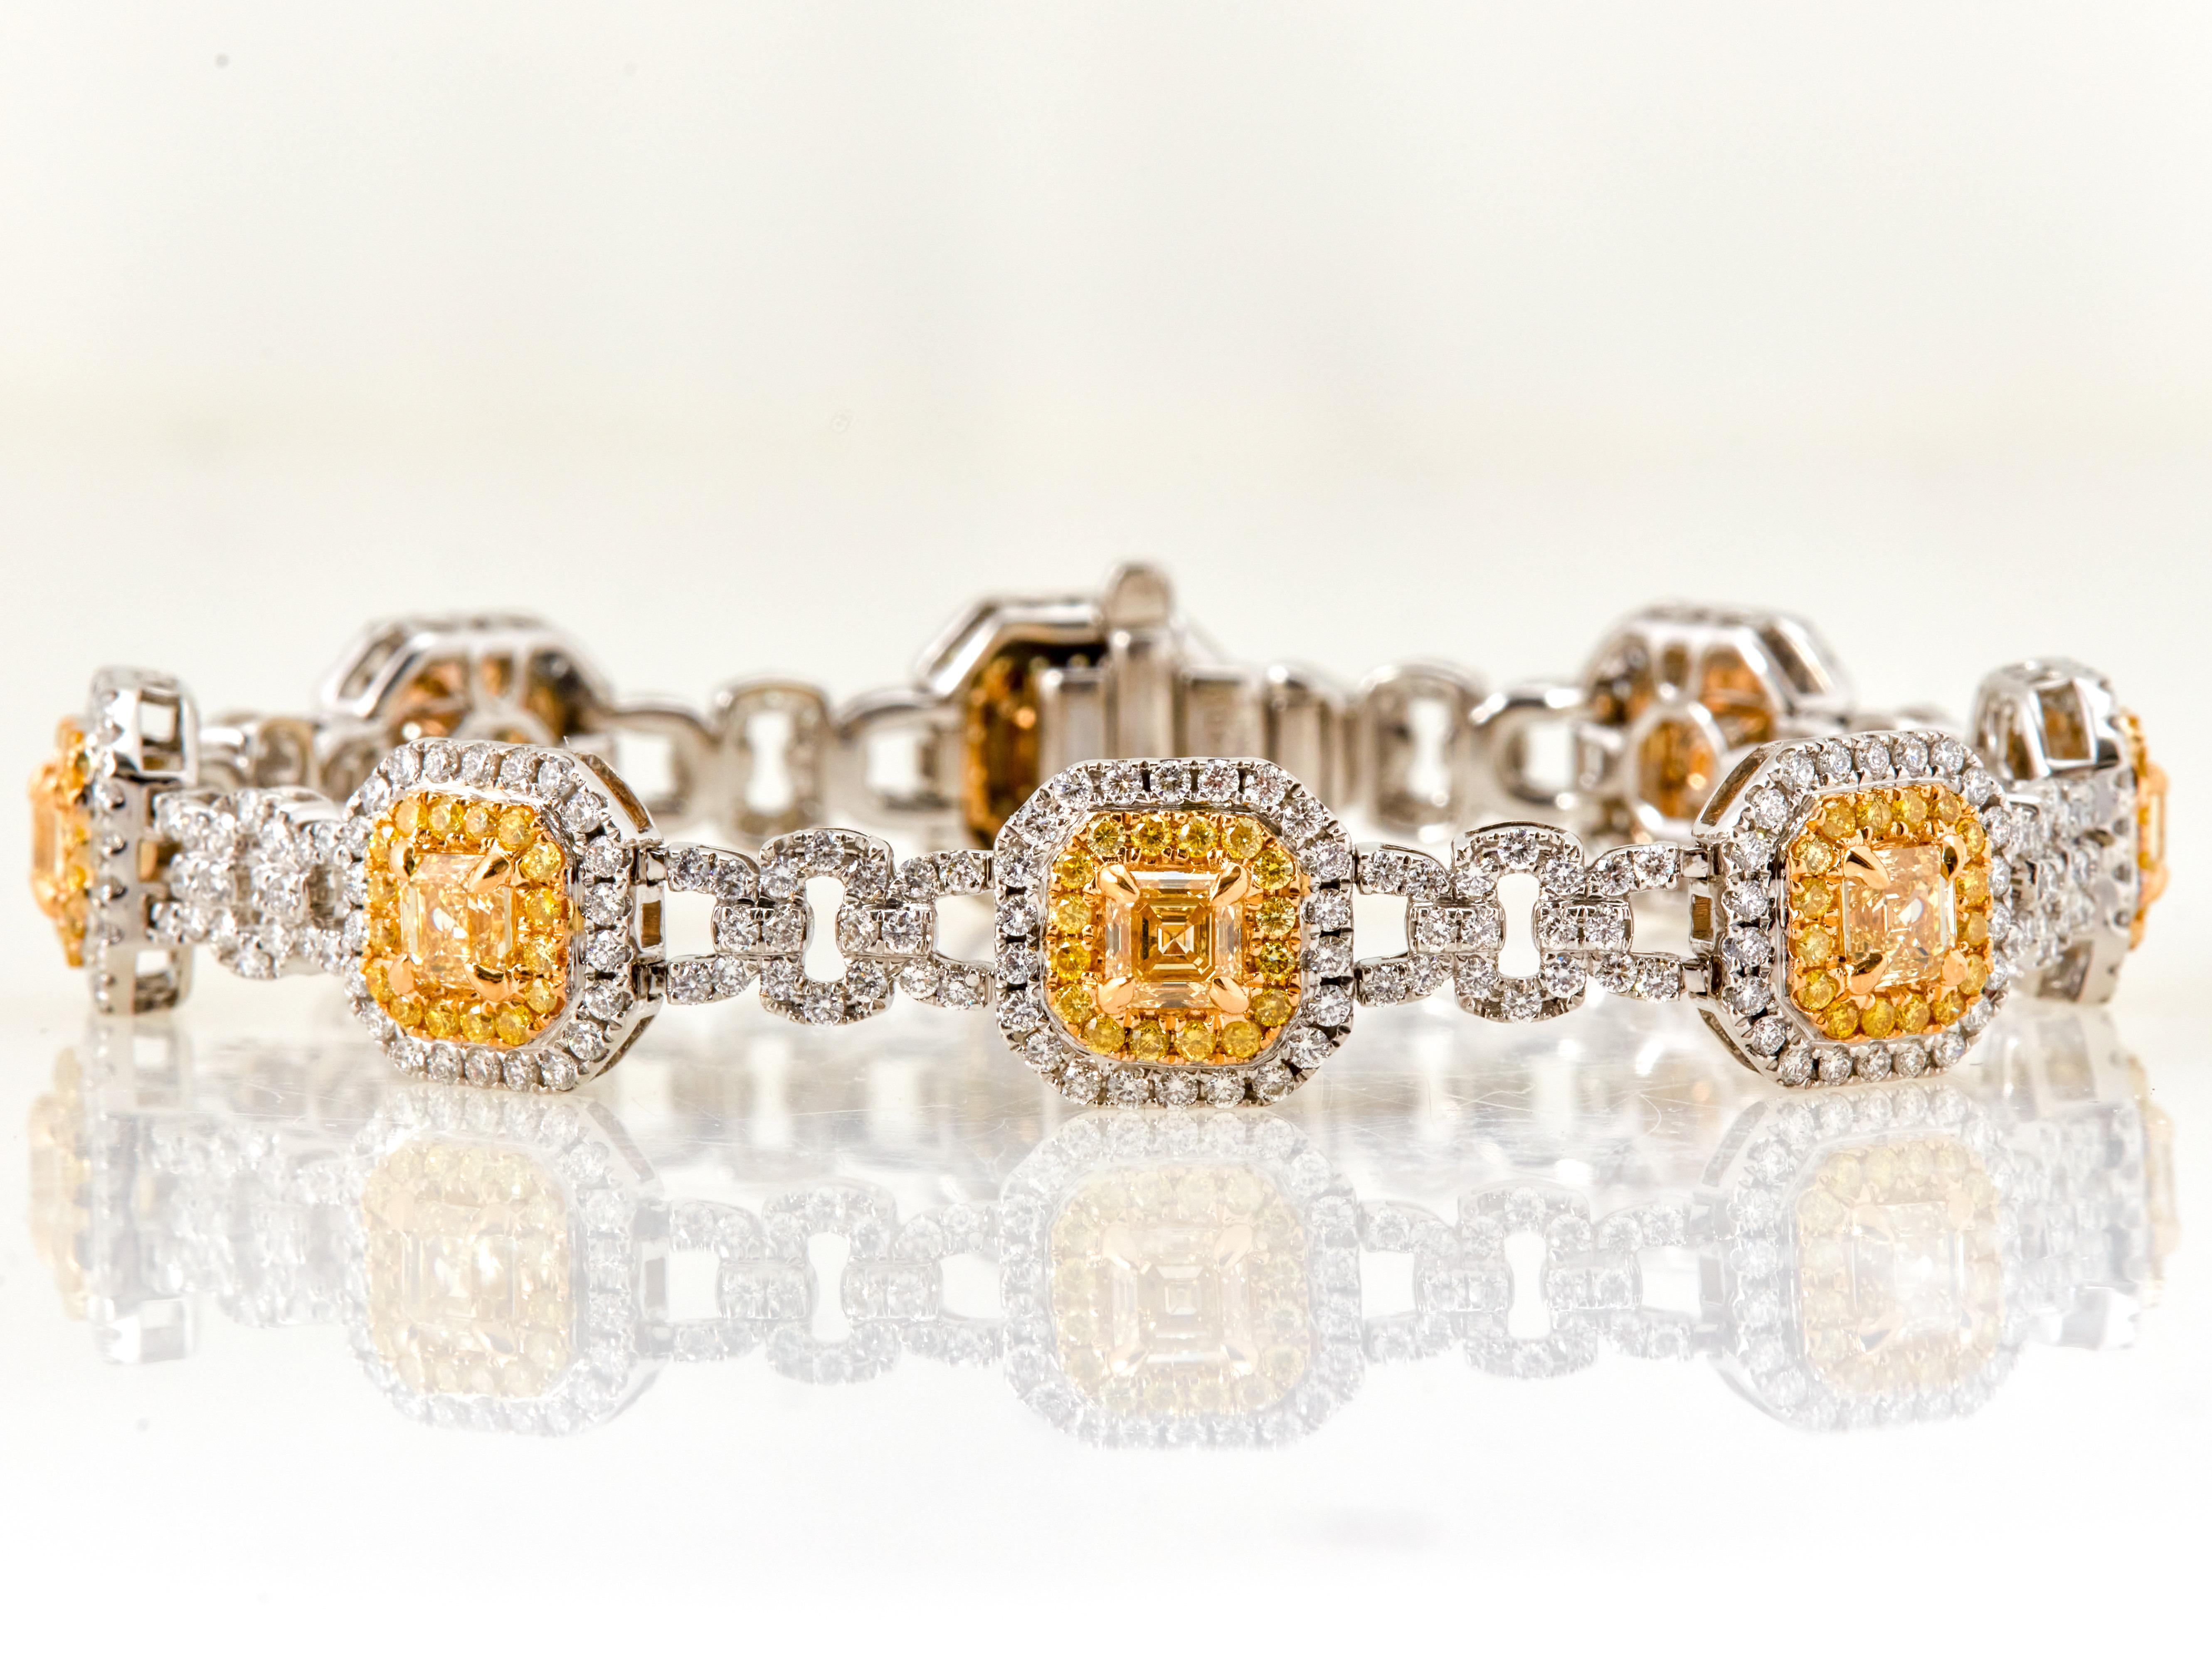 9.62 Carat Asscher Cut Fancy Yellow and White Diamond Bracelet, 18K White Gold In New Condition For Sale In New York, NY